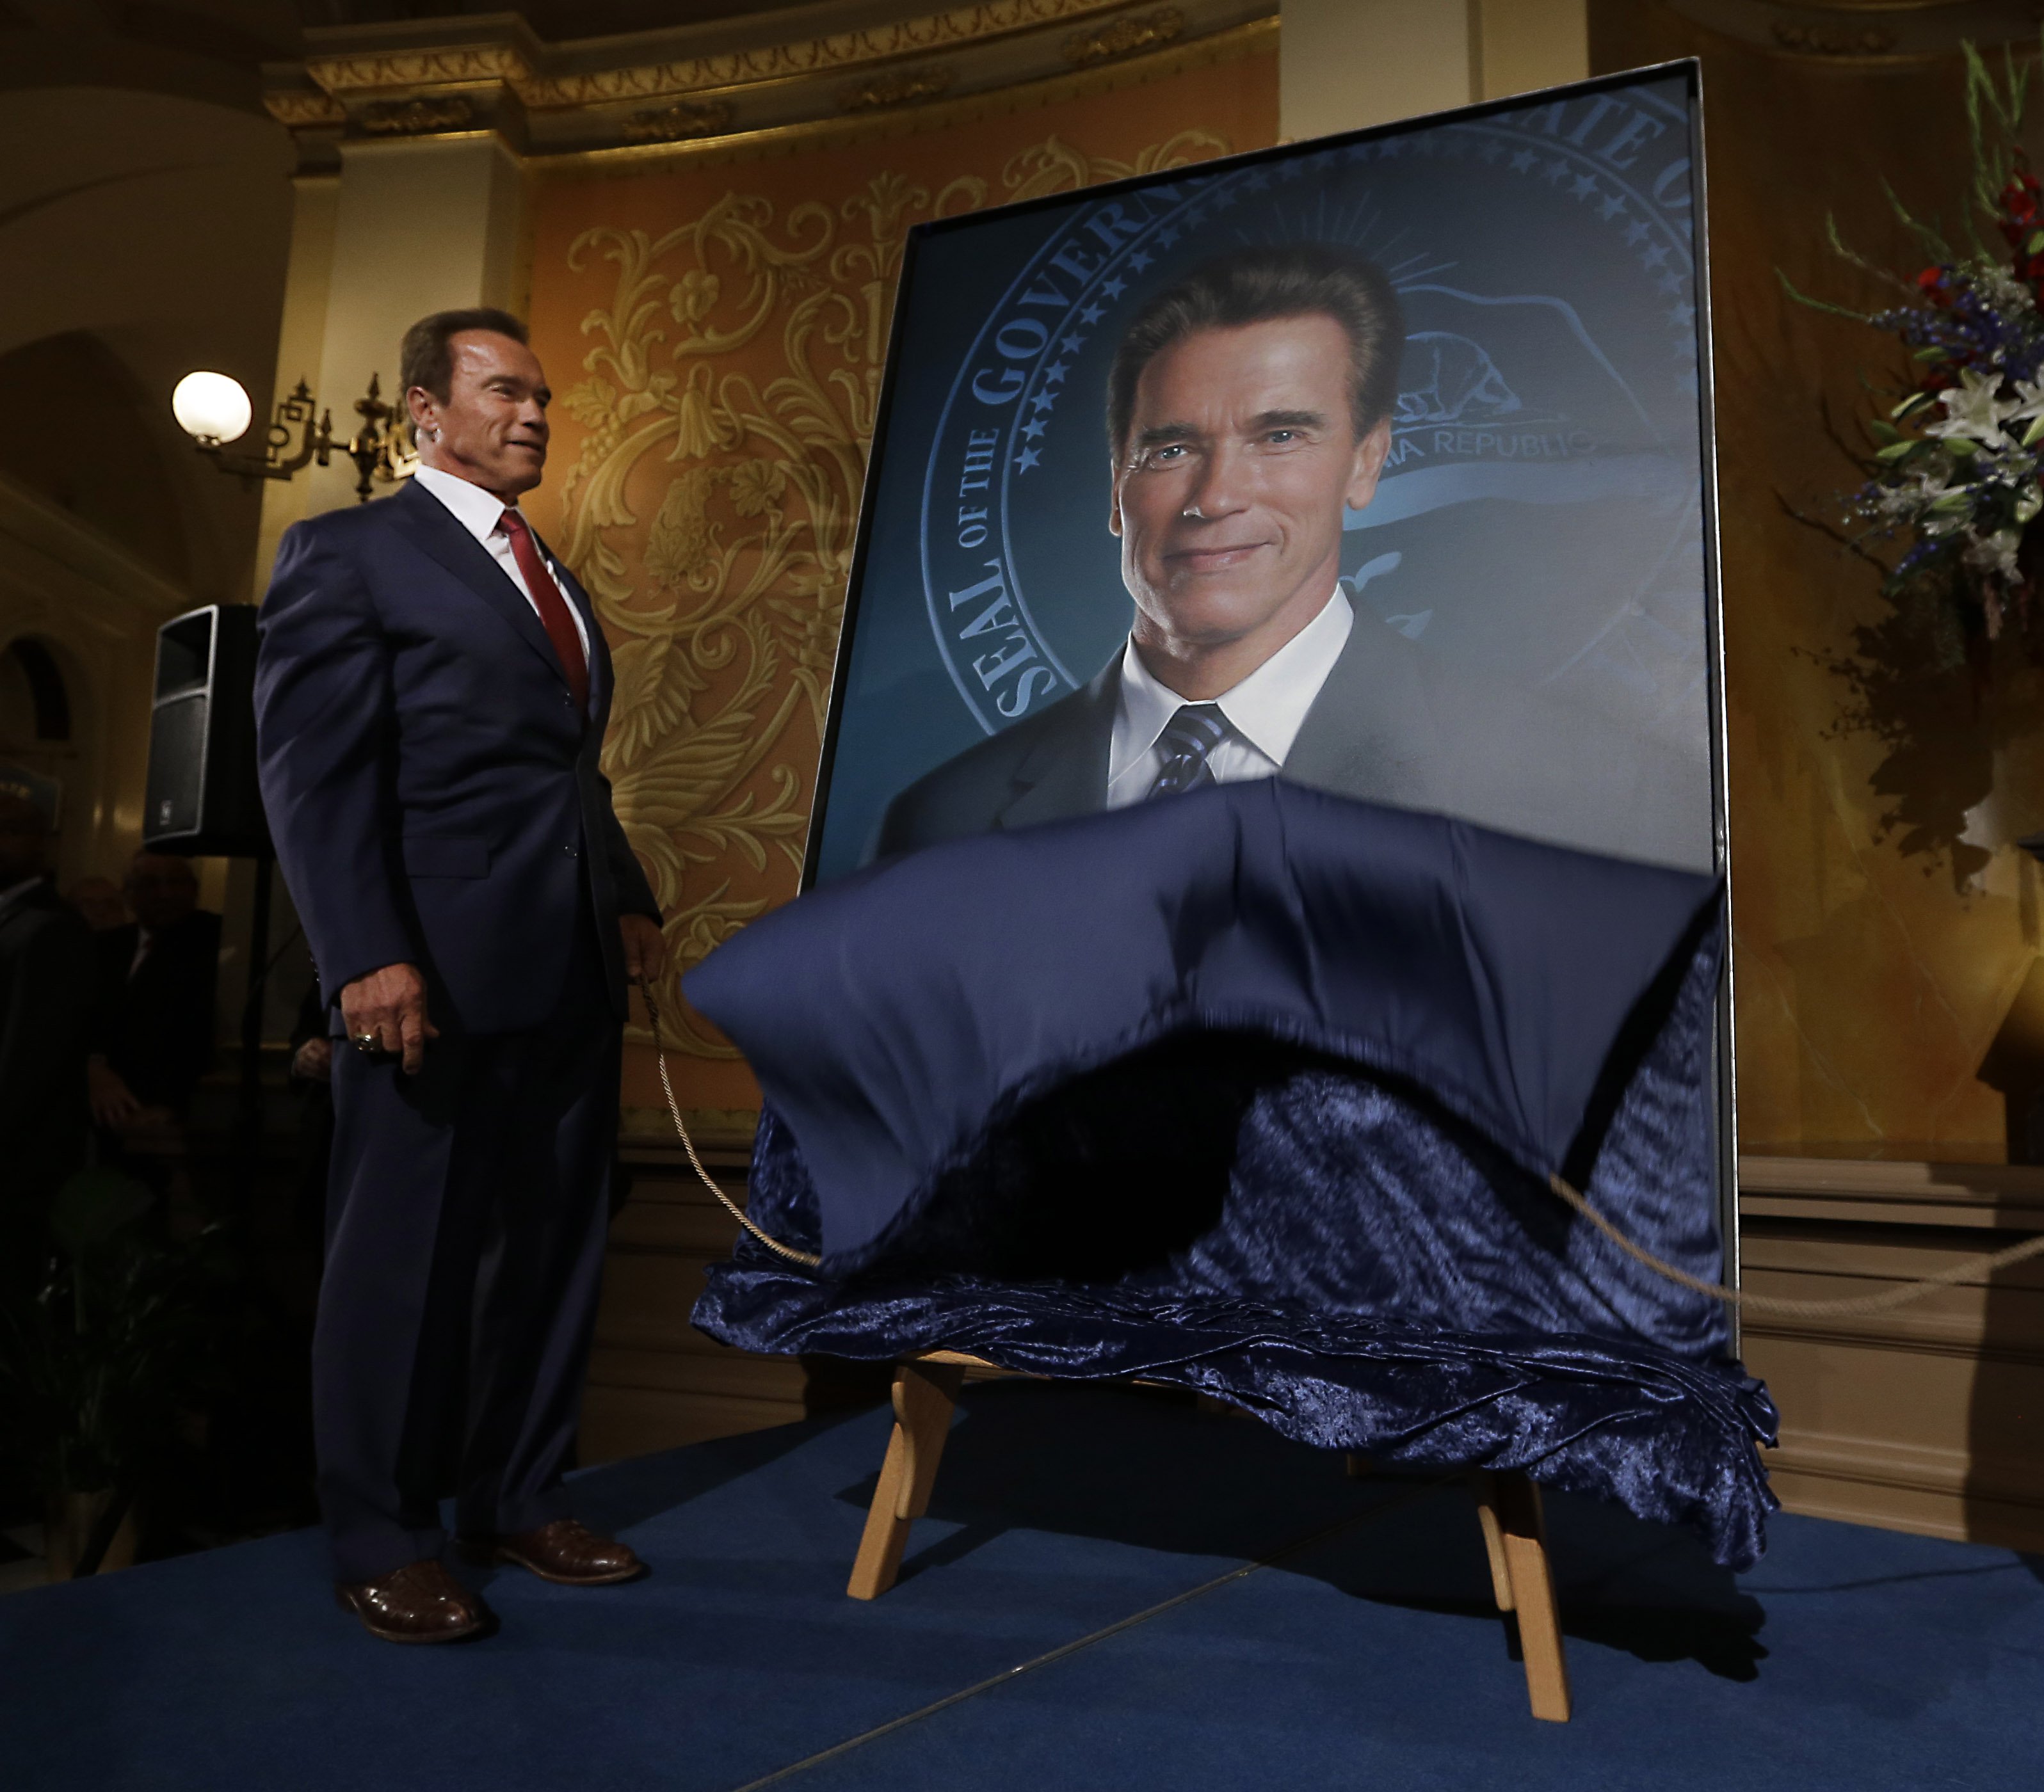 Former Gov. Arnold Schwarzenegger unveil's his official portrait during ceremonies at the Capitol in Sacramento, Calif. on Sept. 8, 2014.  